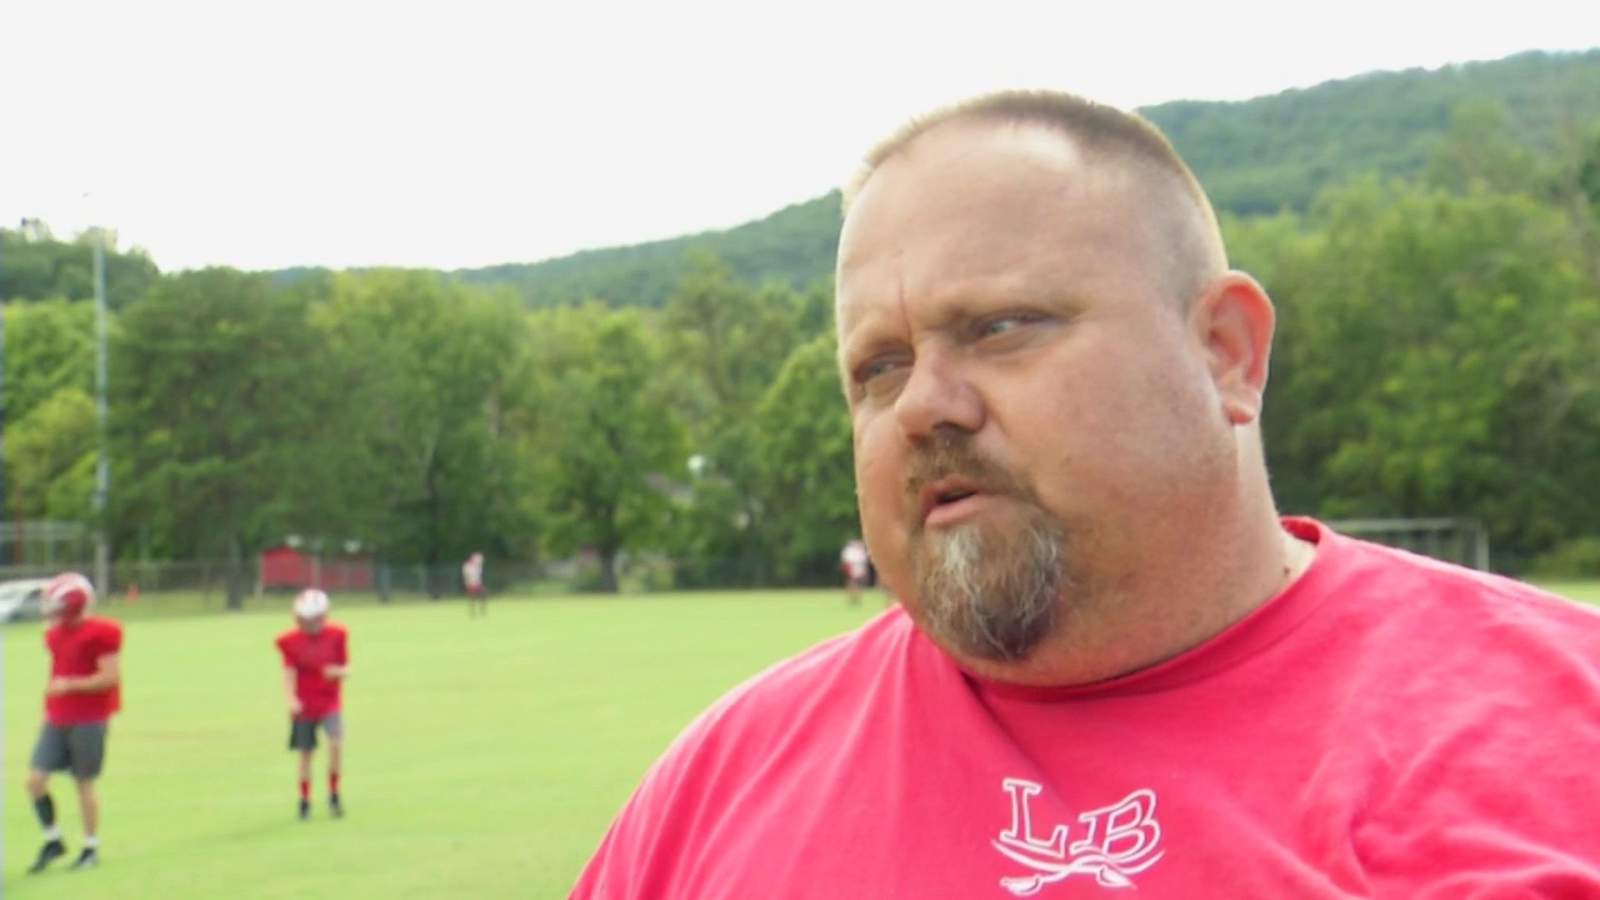 Lord Botetourt football coach files $500,000 defamation lawsuit against Roanoke County leaders